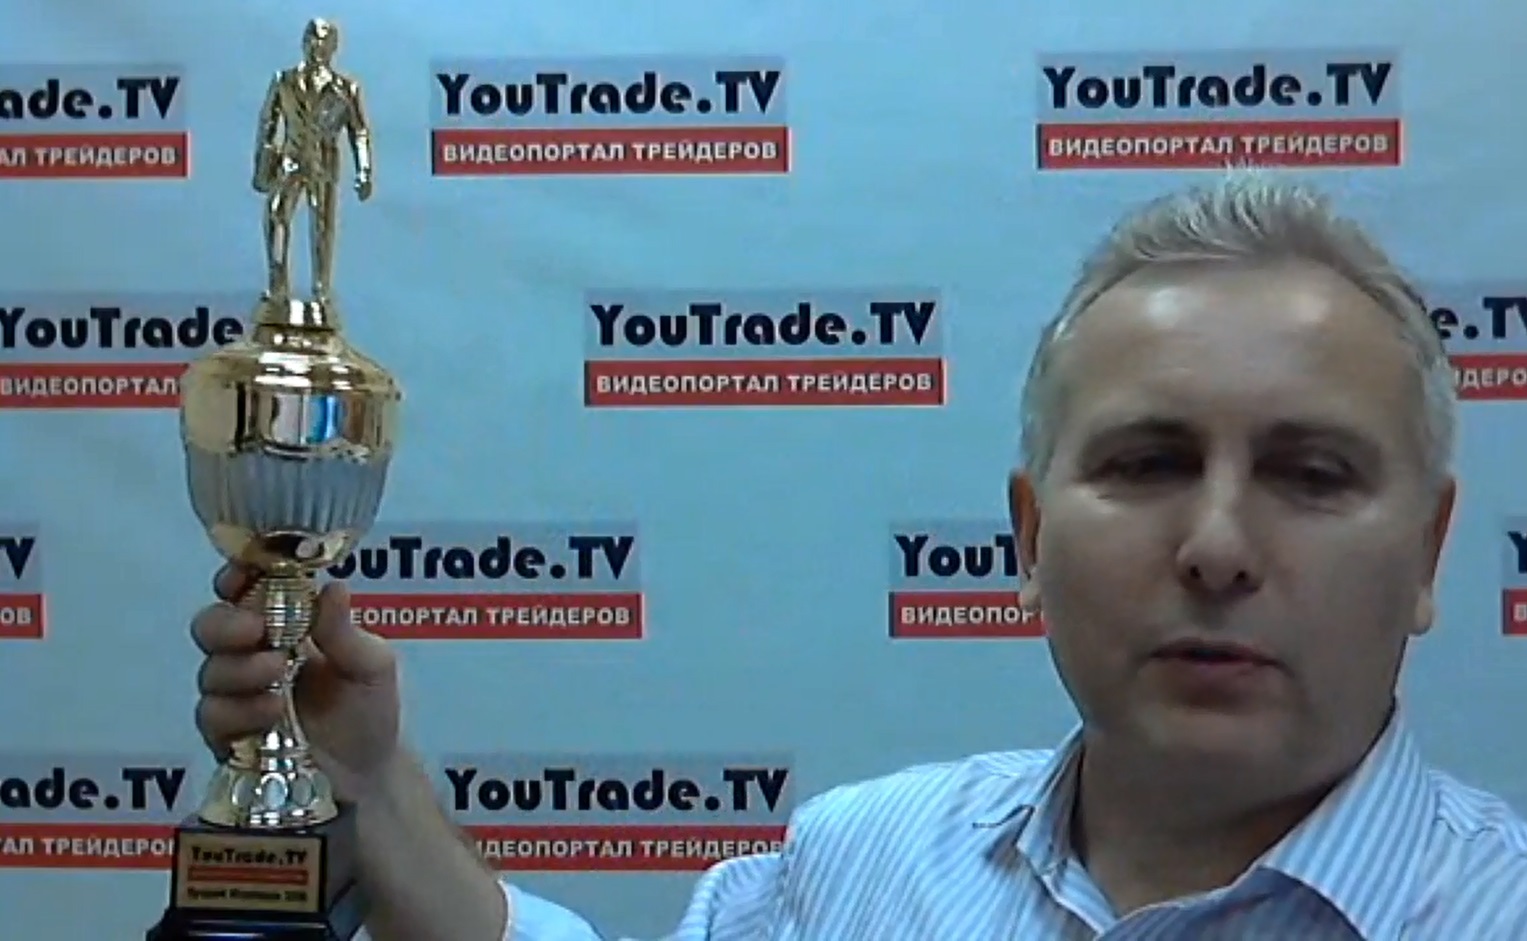     YouTrade.TV